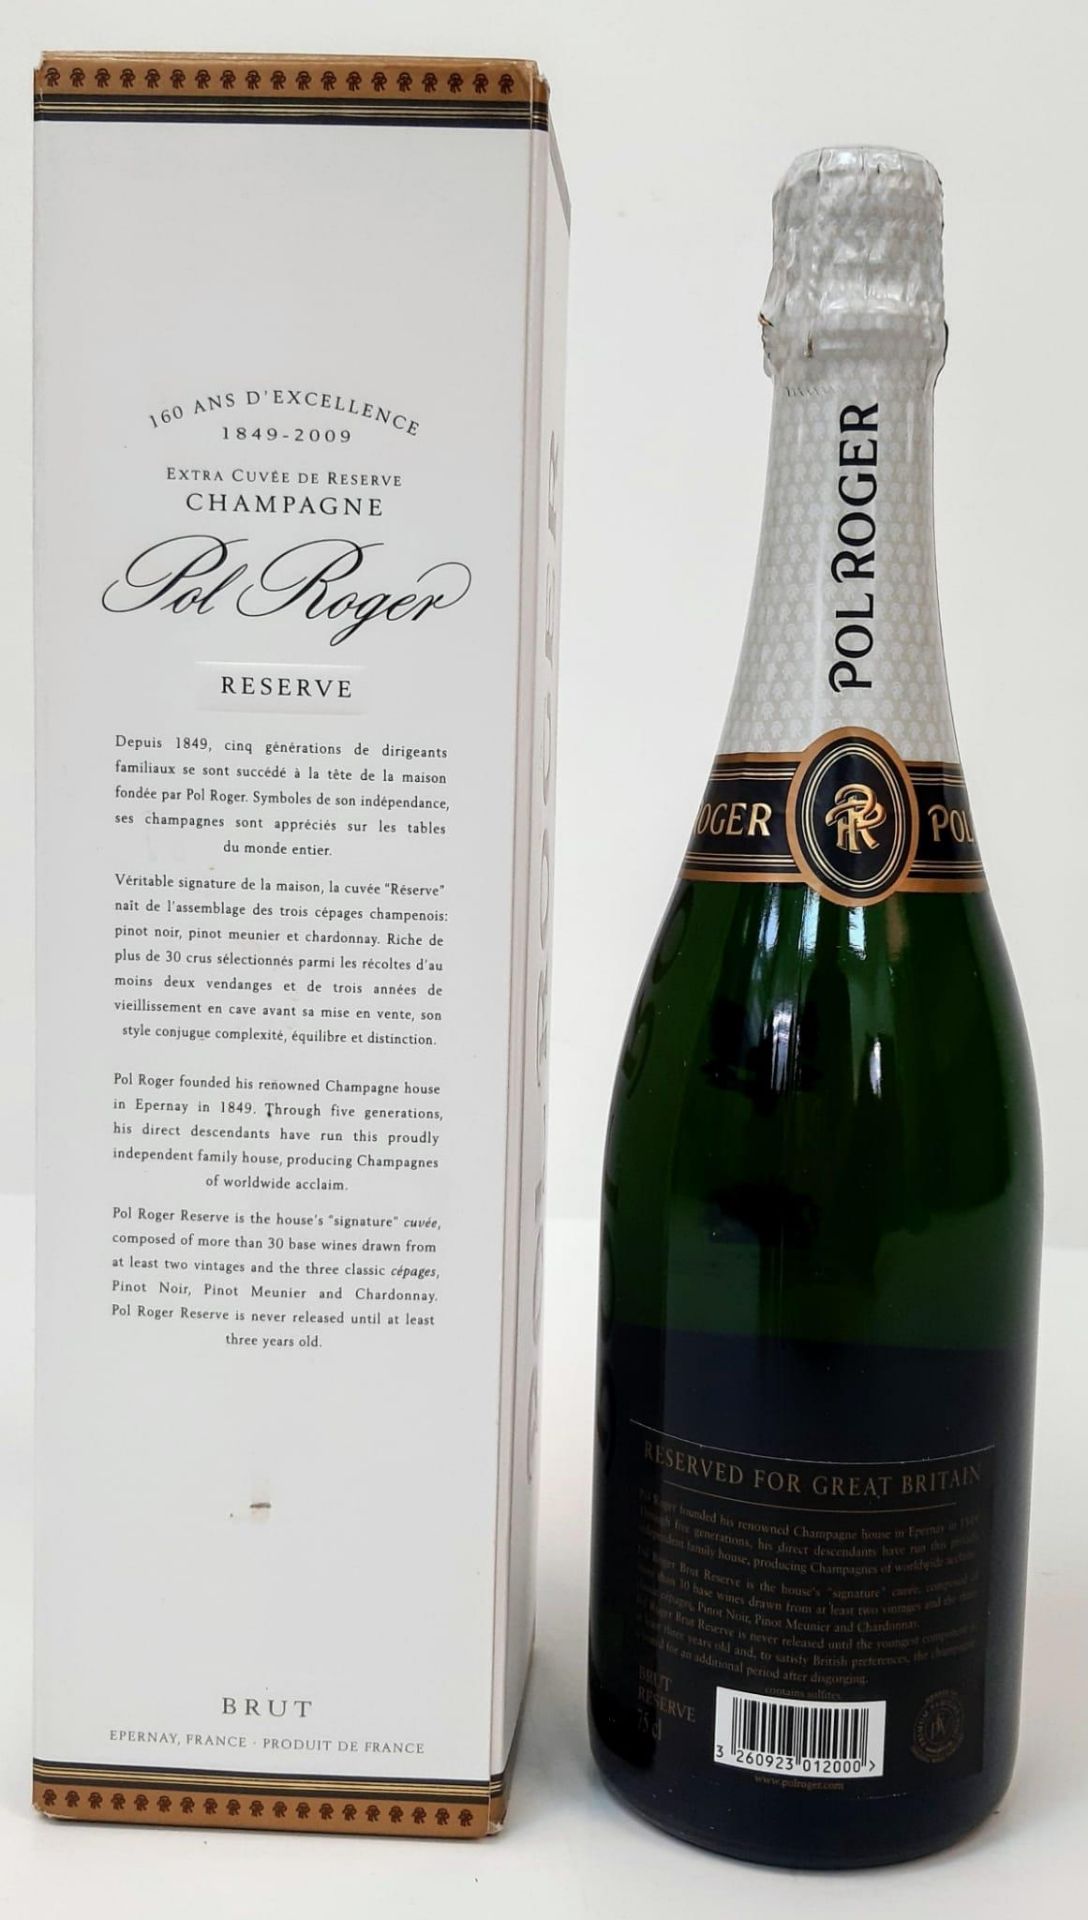 A Rare Bottle of ‘SAS’ emblem Pol Roger Reserve Champagne as donated by 22 SAS to a Military Charity - Image 2 of 3